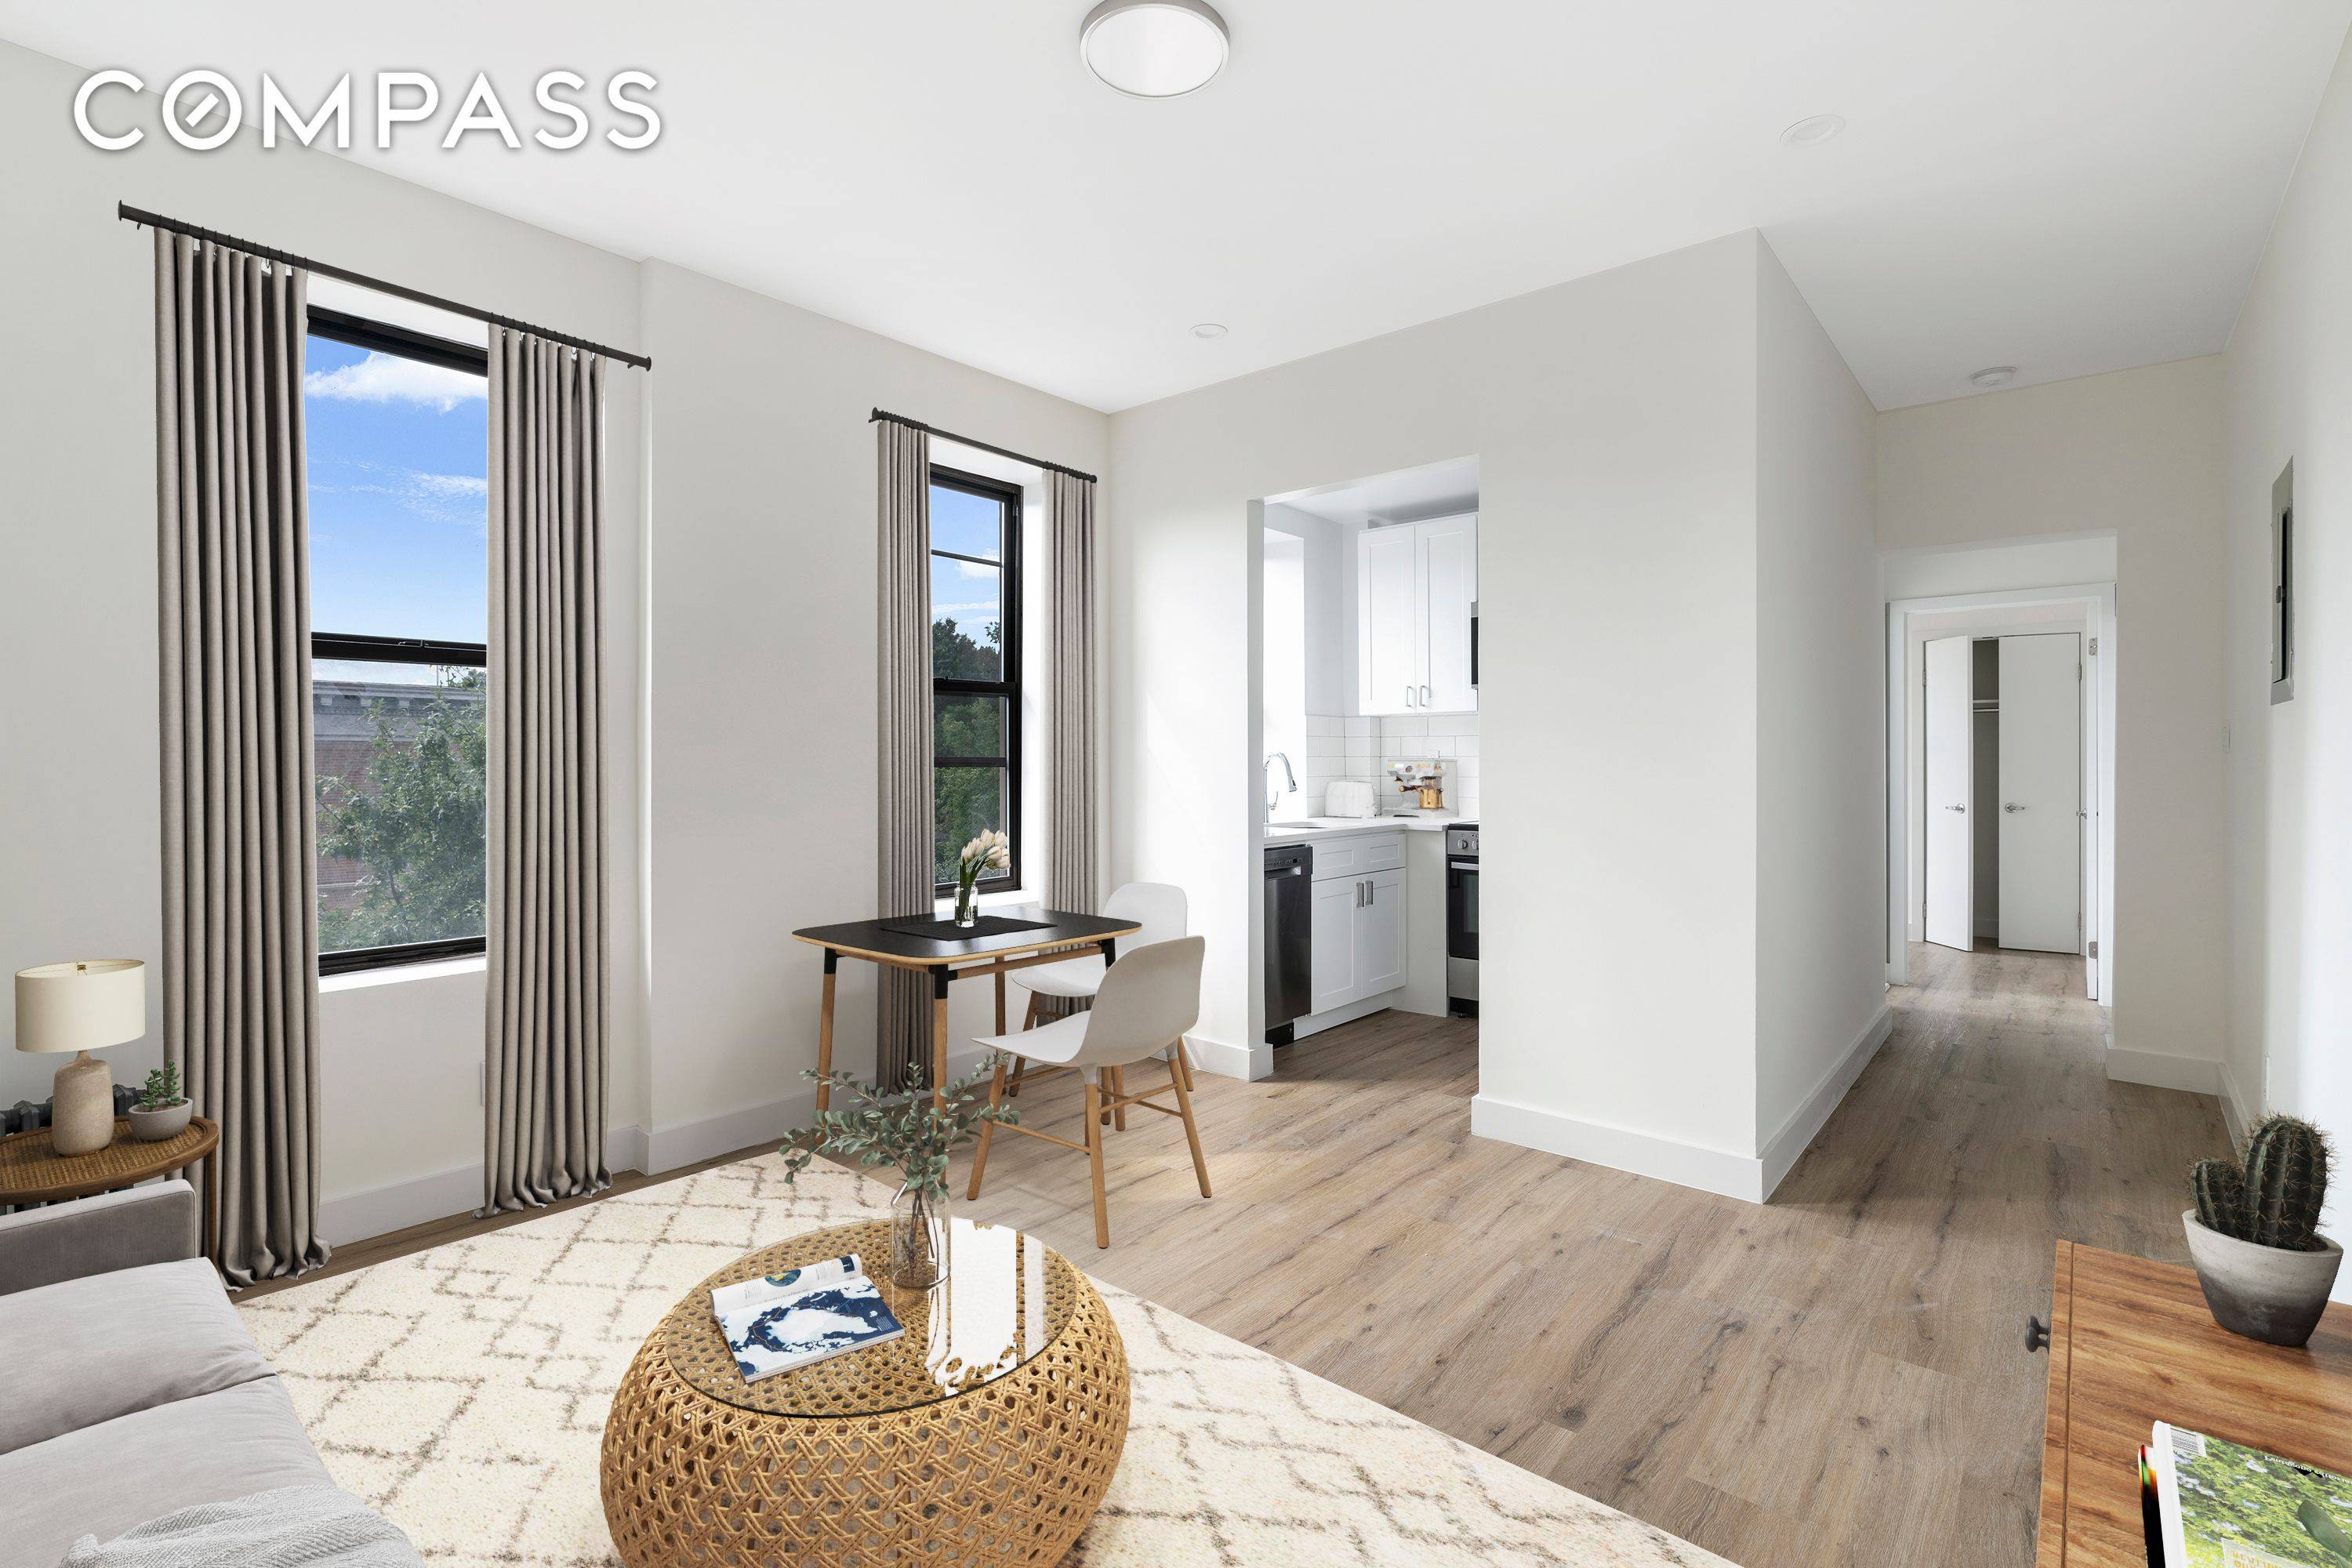 Windsor Terrace Corner Building at Prospect Park SW 10th Ave Gut Renovated 1 Bed 1 Bath with Brand New Stainless Steel Kitchen, D W, M W, Washer Dryer In Unit, ...